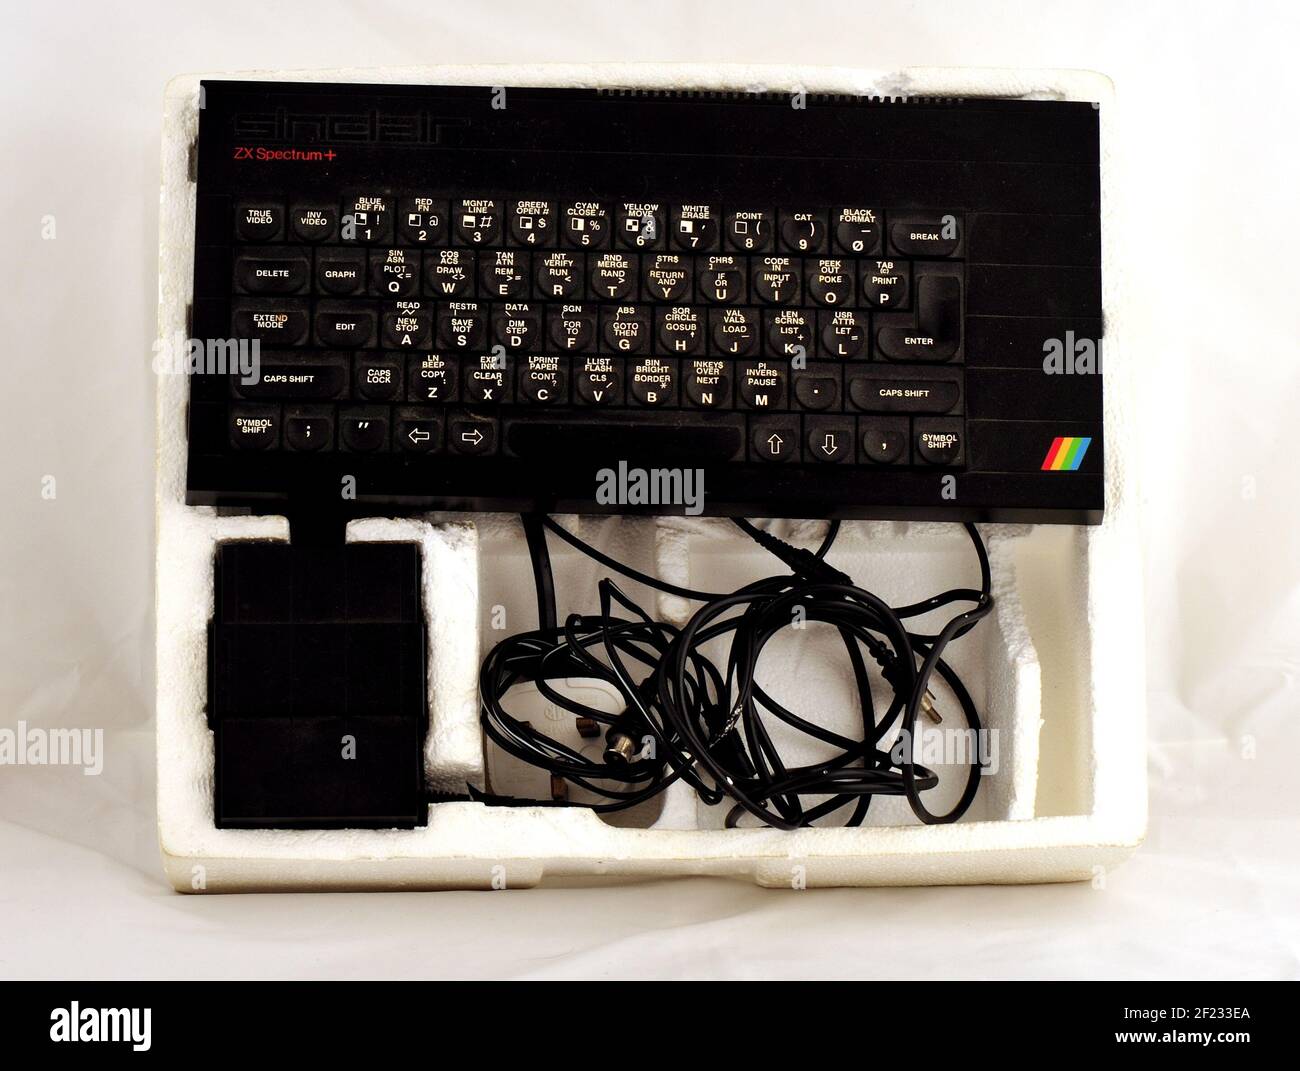 1980s vintage computing technology, the ZX Spectrum by Sinclair Stock Photo